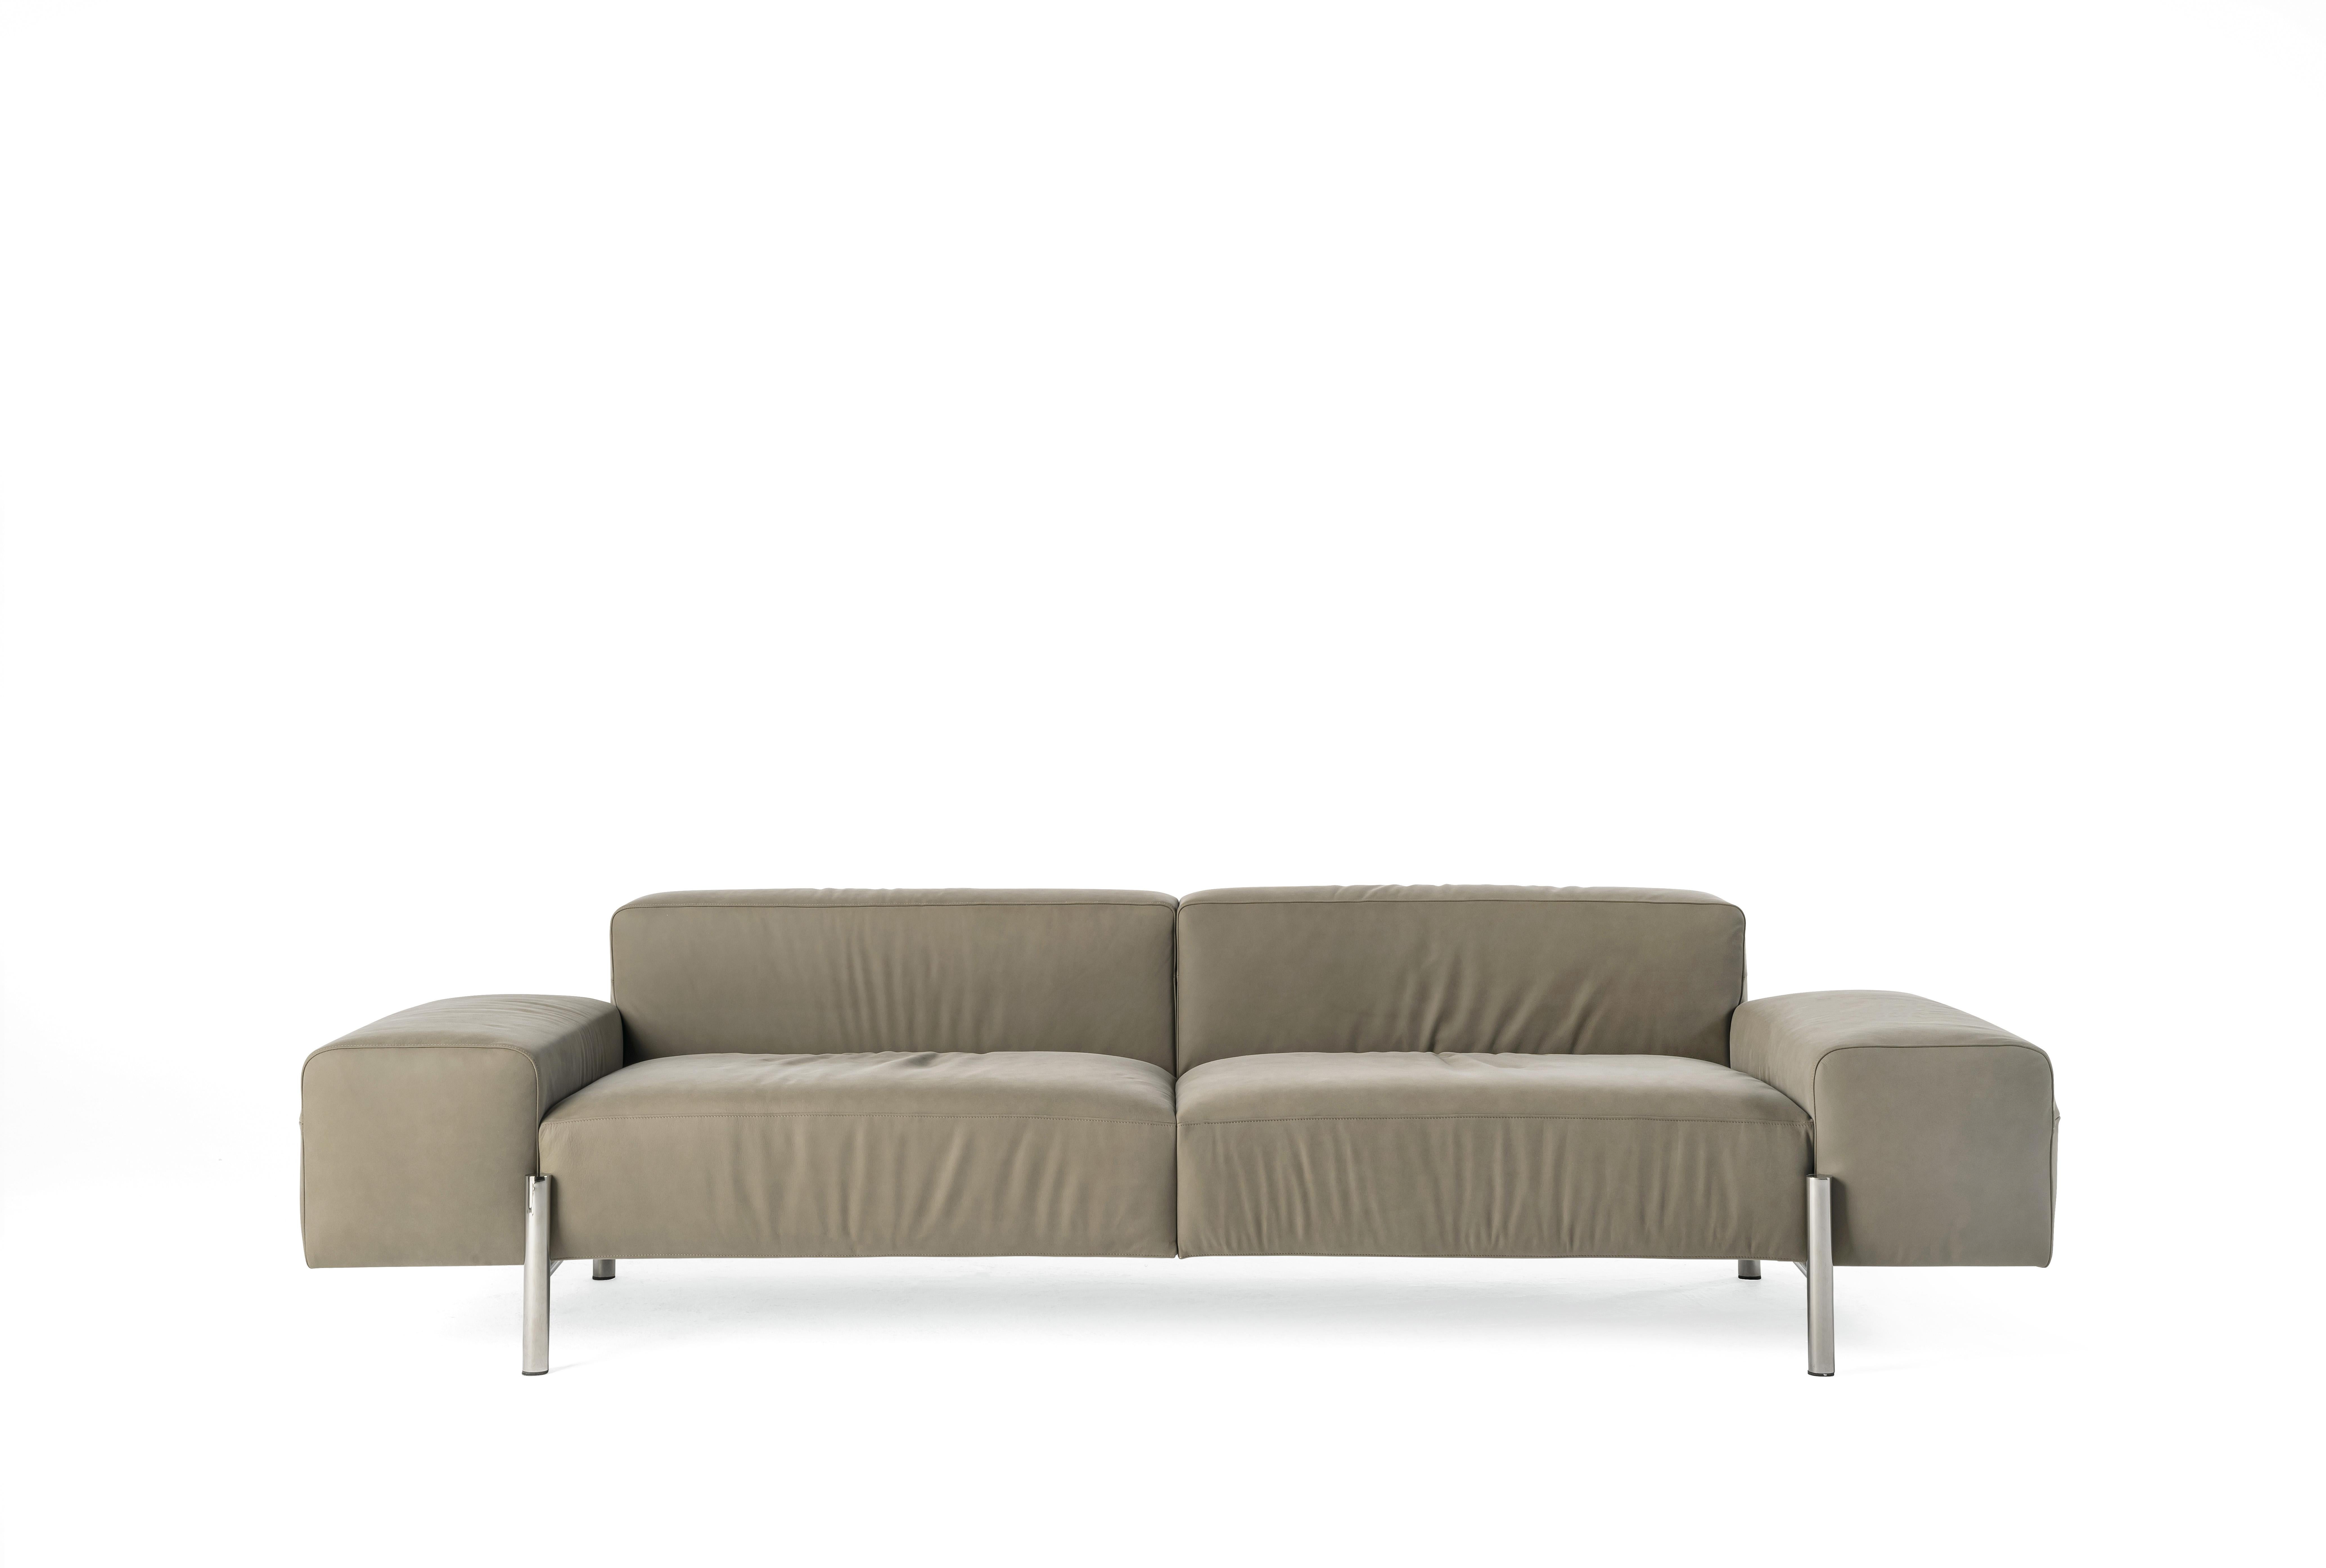 Contemporary elegance and metropolitan spirit for the York sofa. Perfect for a modern and luxurious living room, the sofa recalls the business-oriented environments of American cities.
The simplicity given by the linearity of the design is balanced